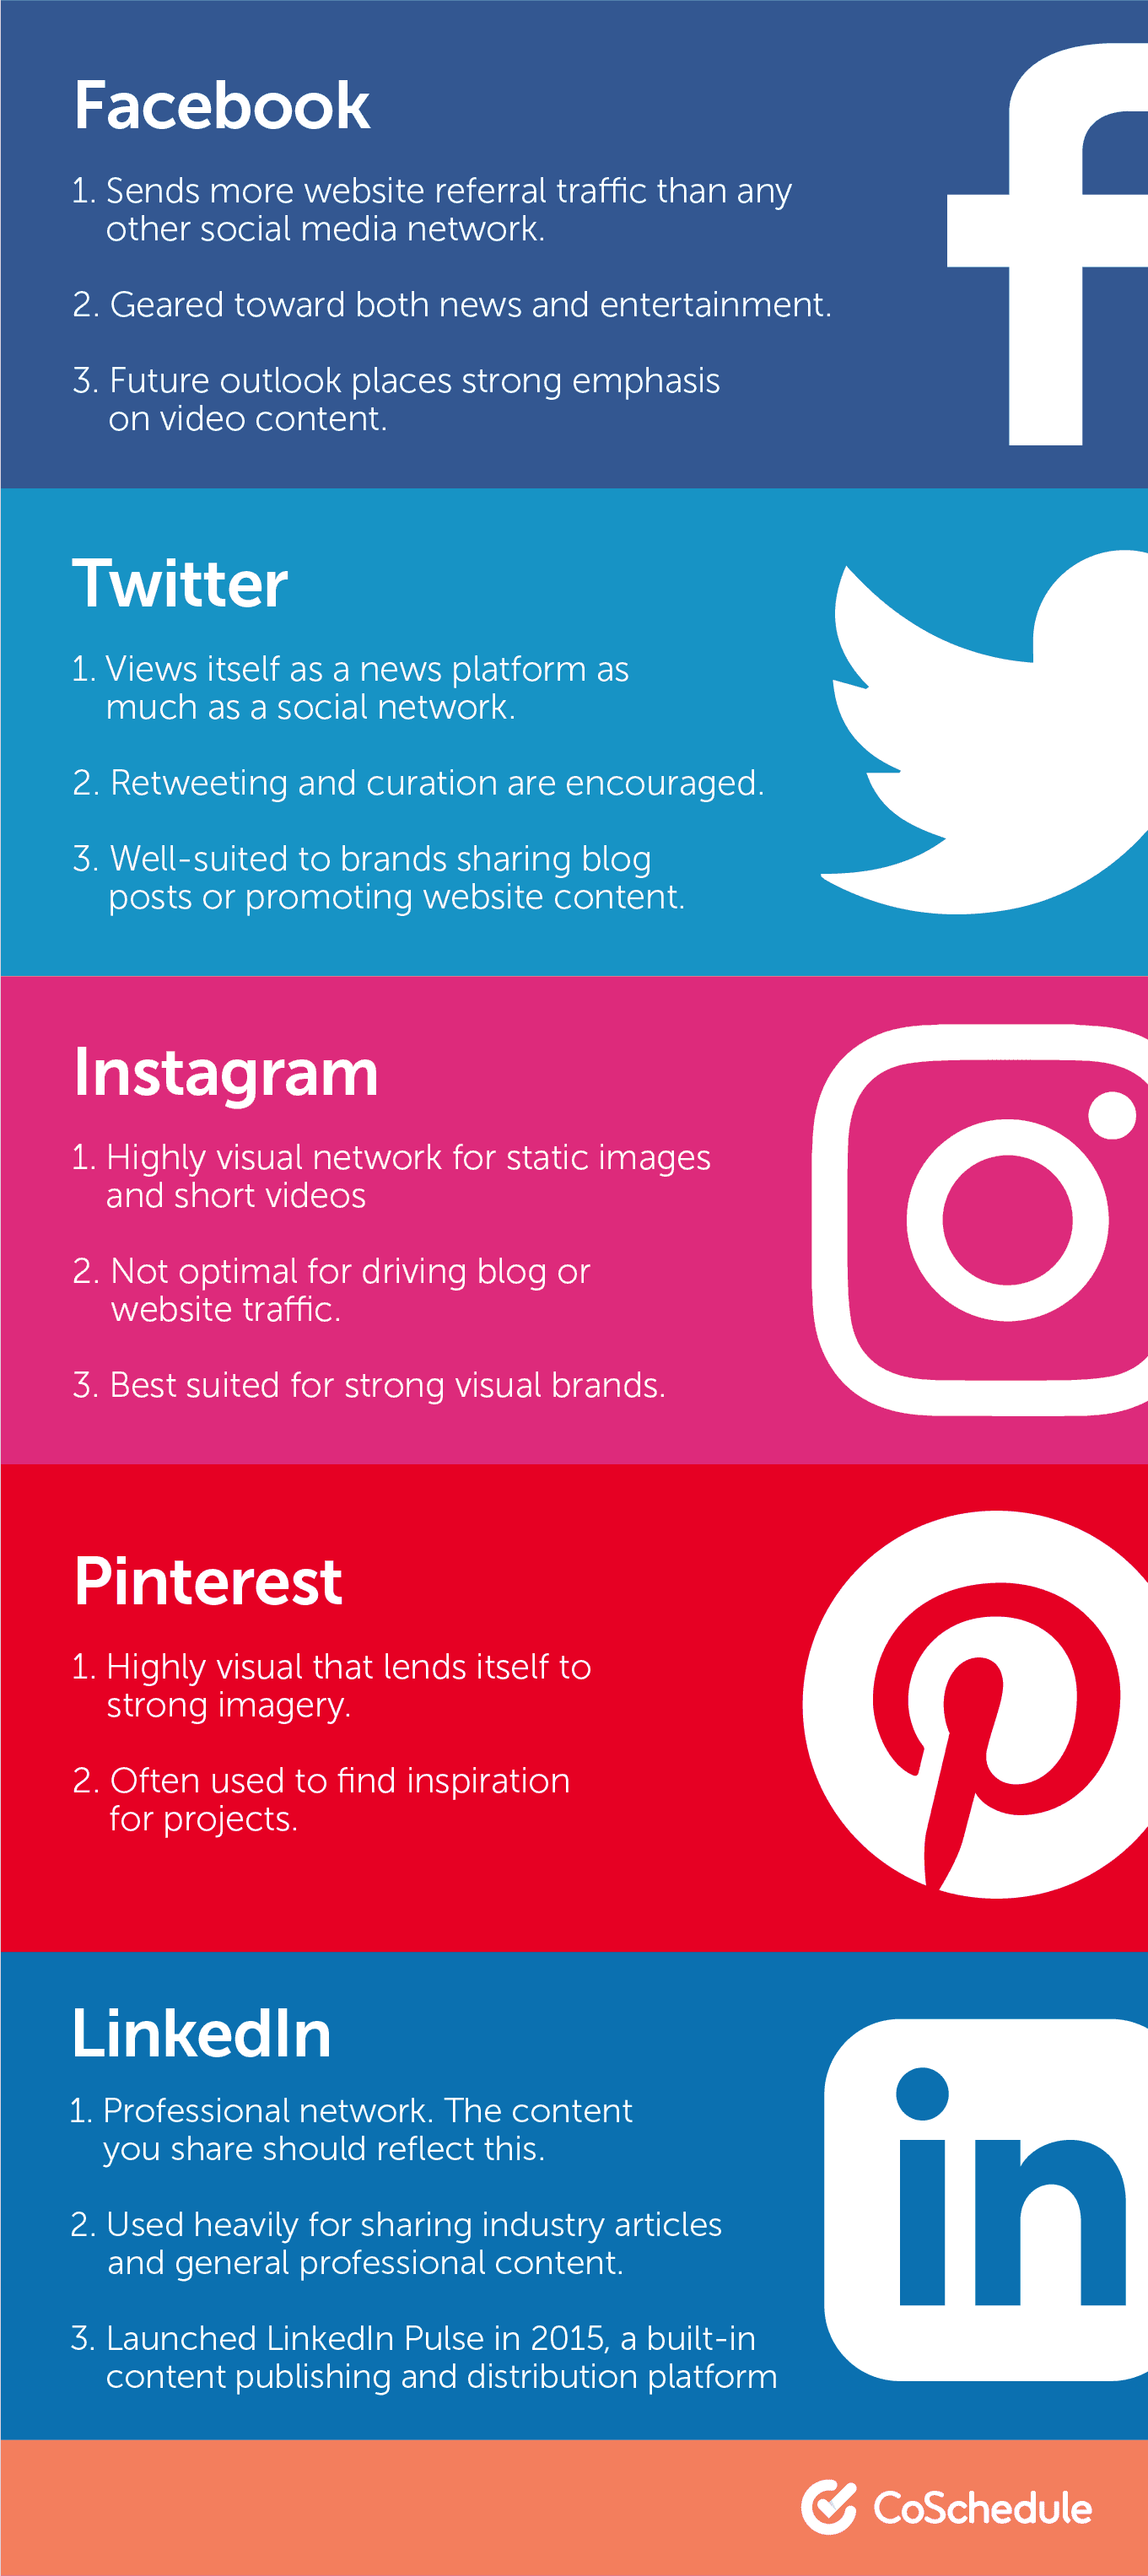 Reference list of how to be utilize Facebook, Twitter, Instagram, Pinterest and LinkedIn.